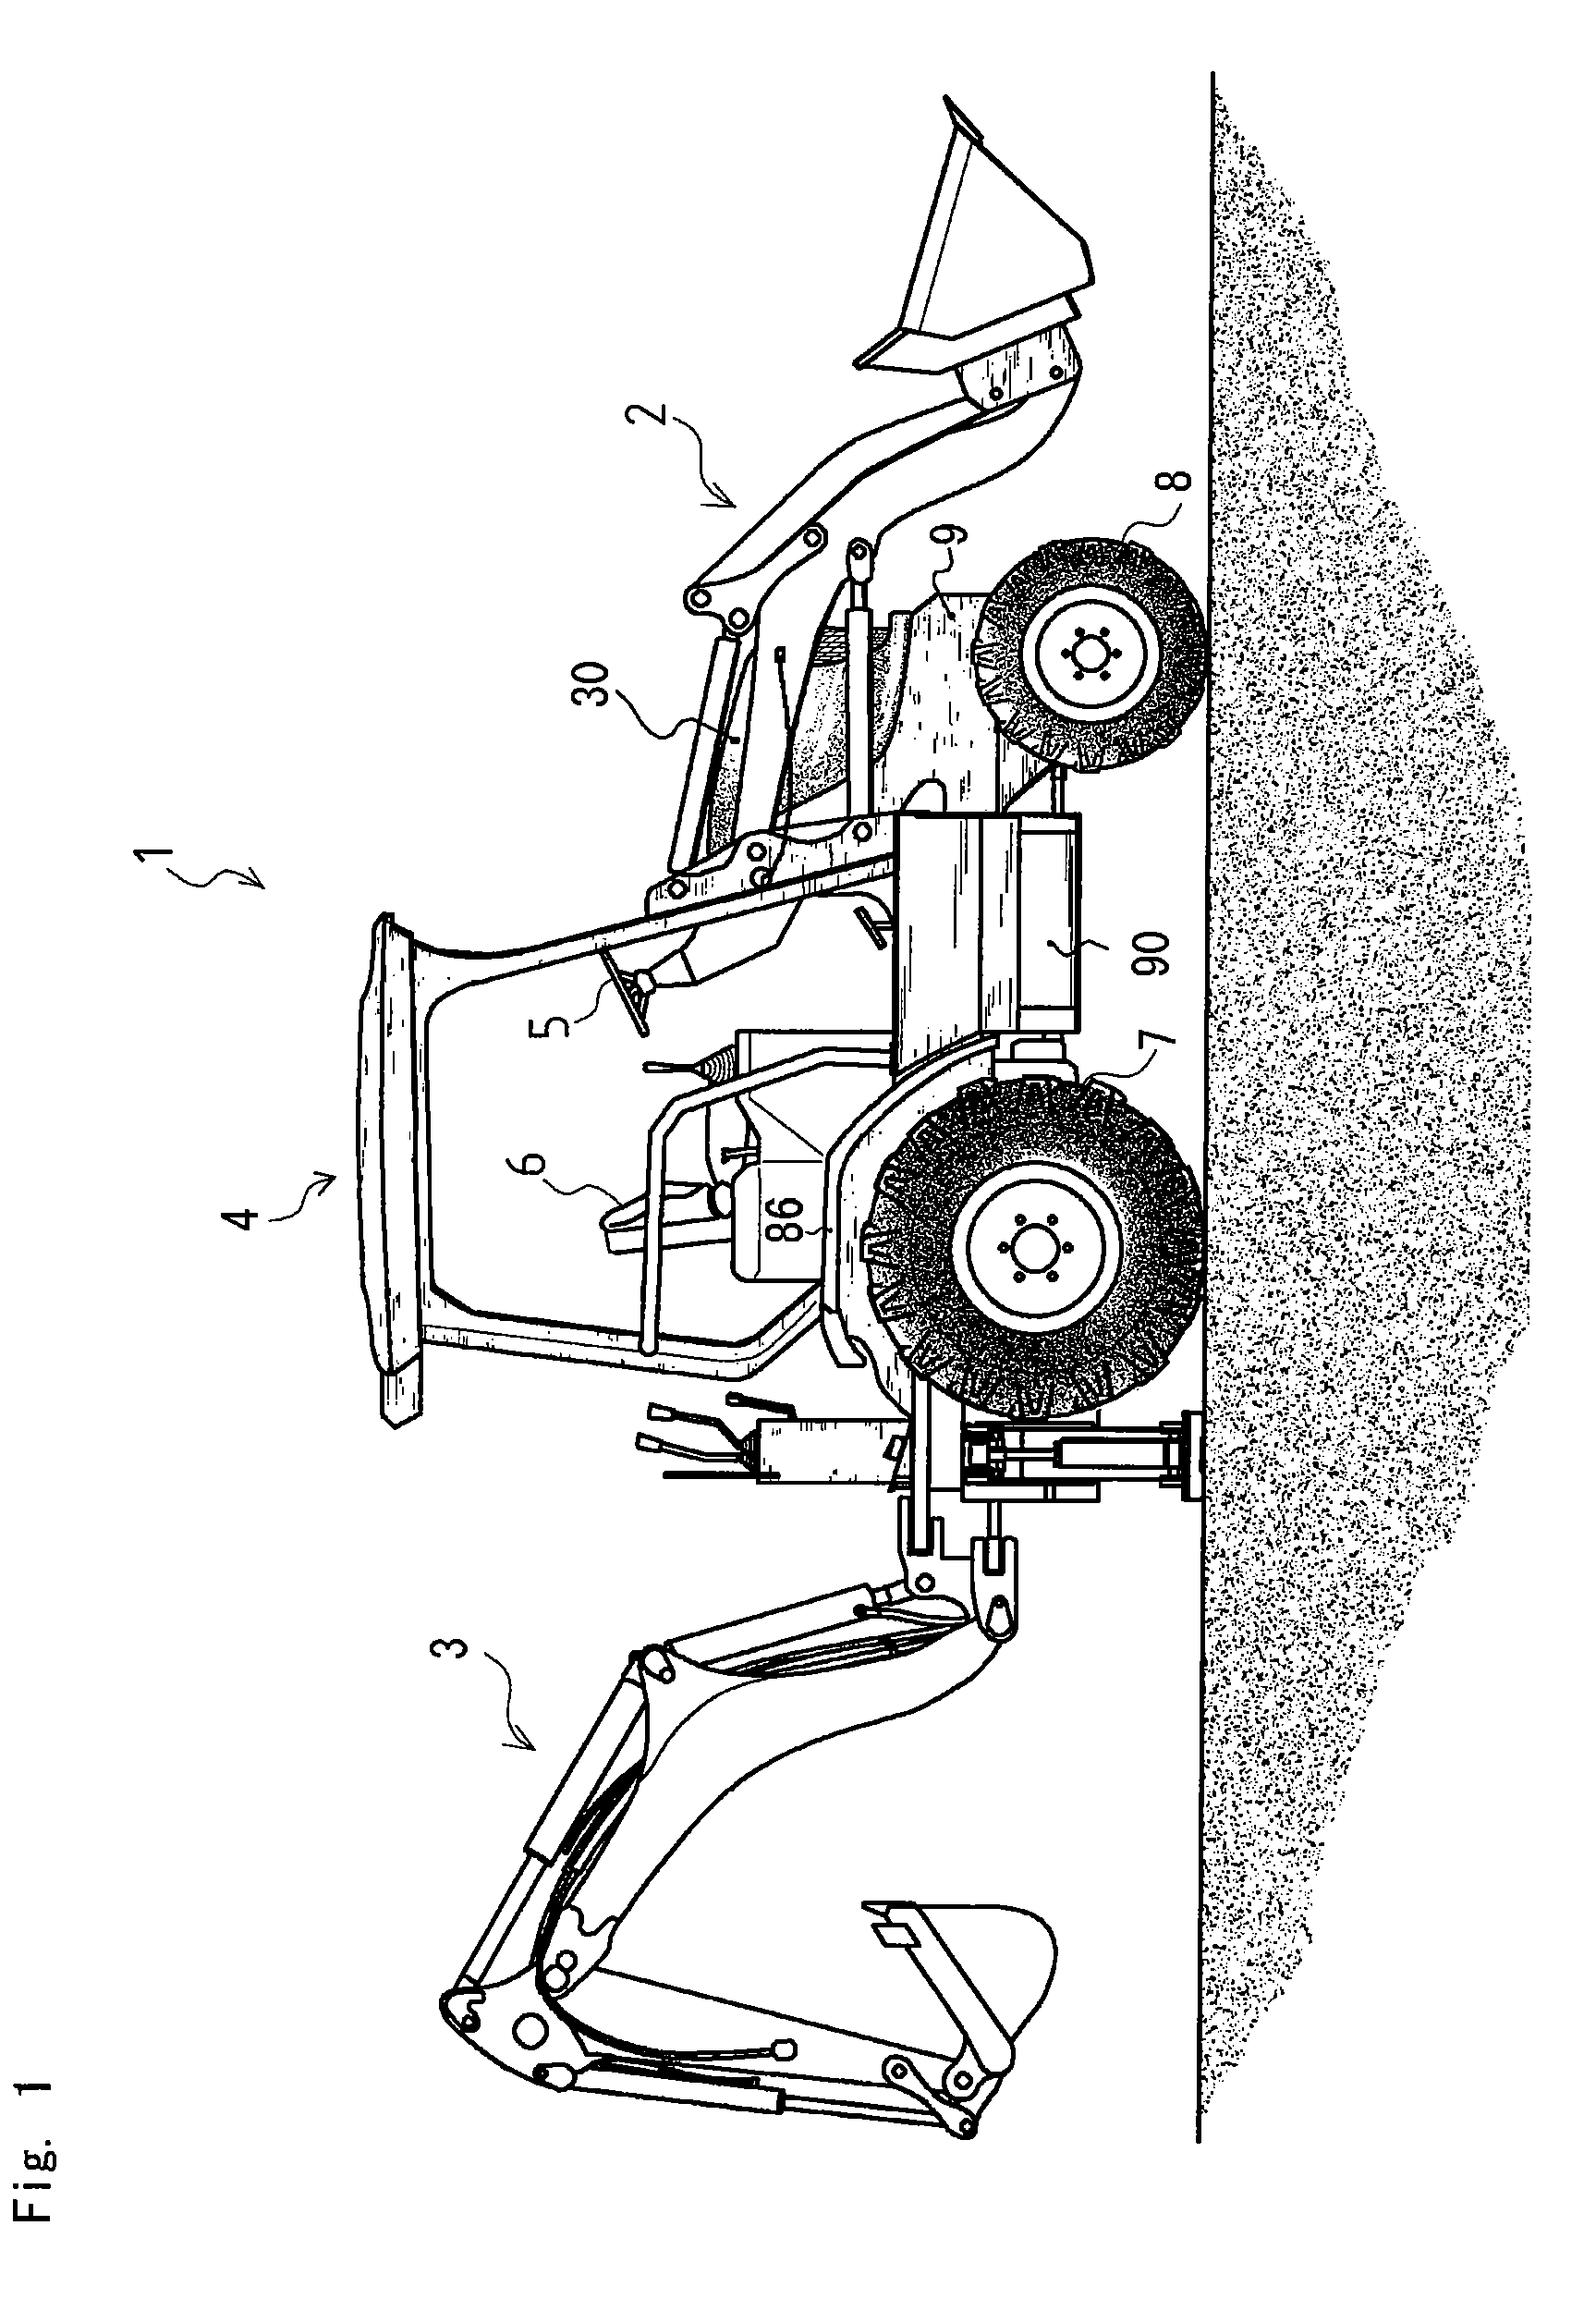 Frame structure for working vehicle